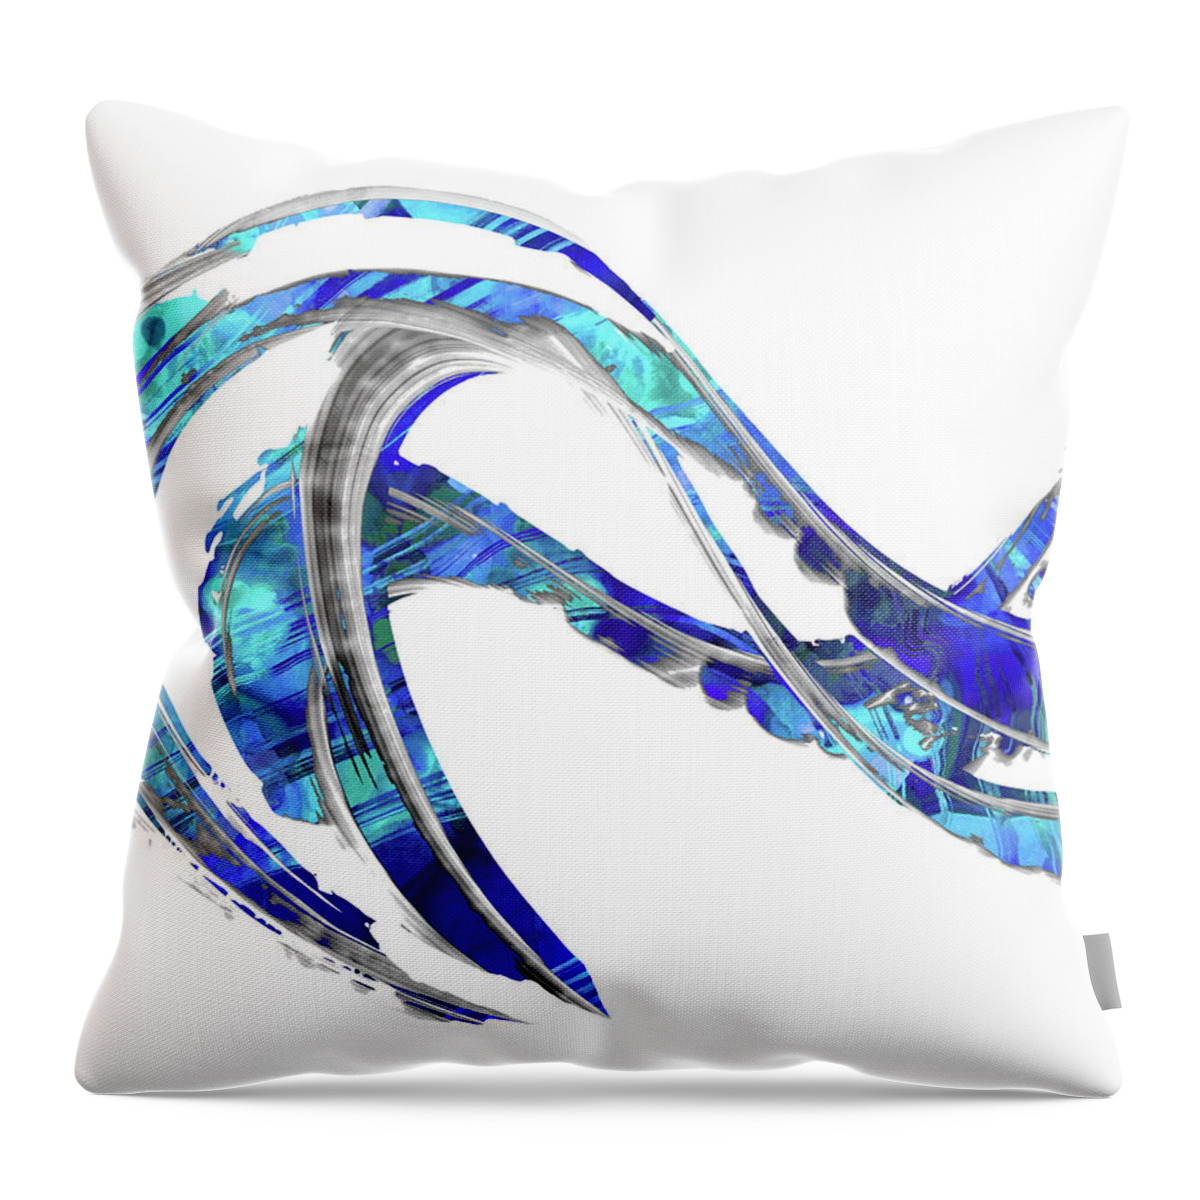 Blue Throw Pillow featuring the painting Blue And White Painting - Wave 2 - Sharon Cummings by Sharon Cummings